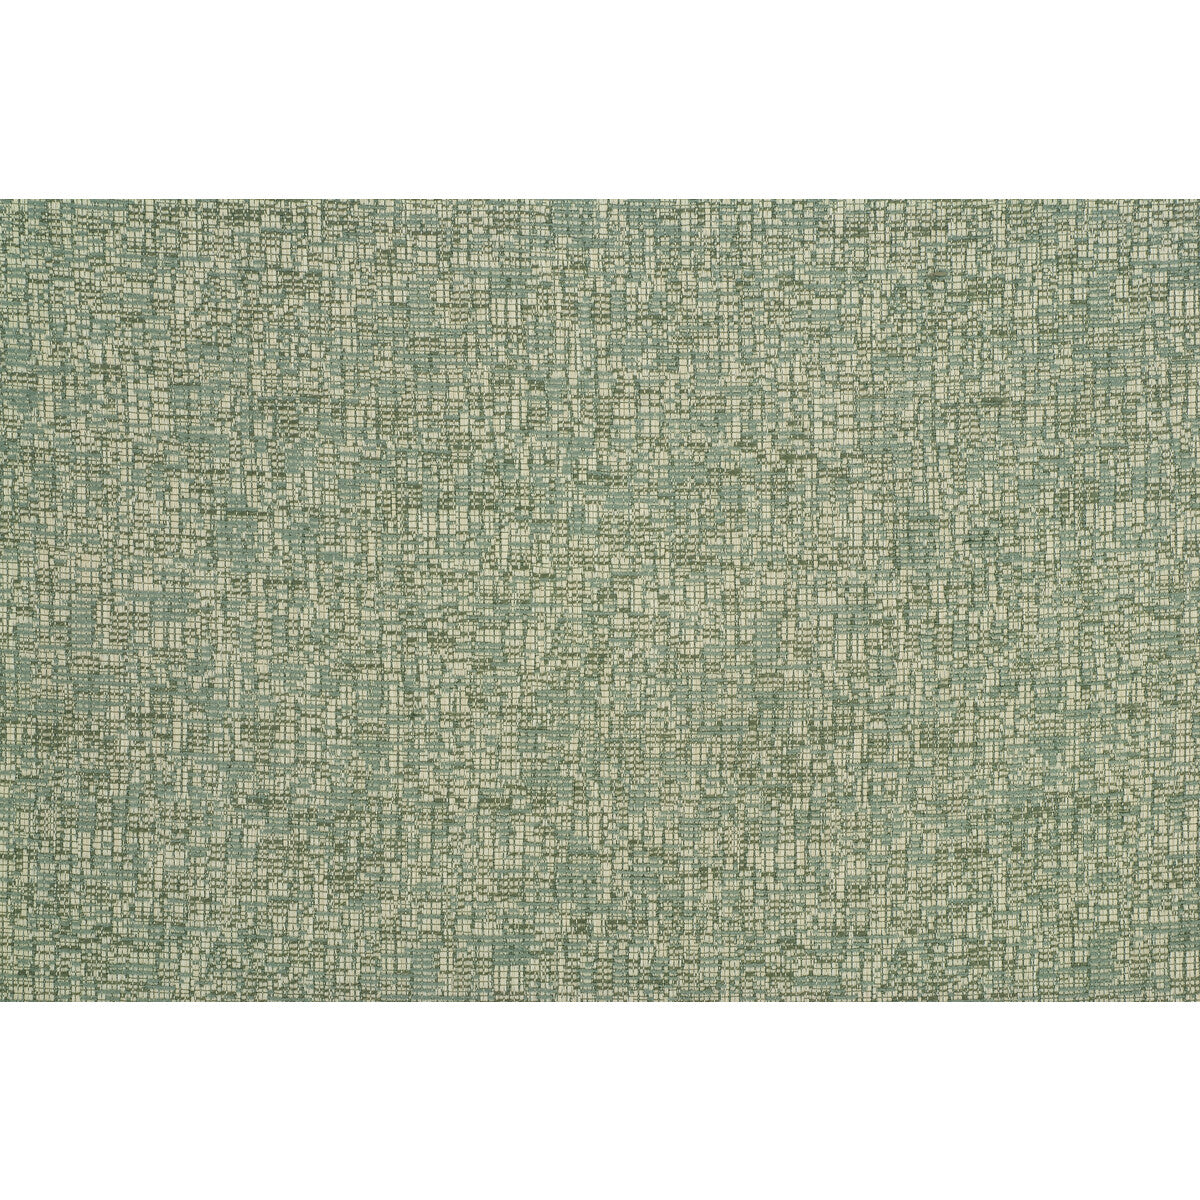 Kravet Contract fabric in 34737-13 color - pattern 34737.13.0 - by Kravet Contract in the Crypton Incase collection